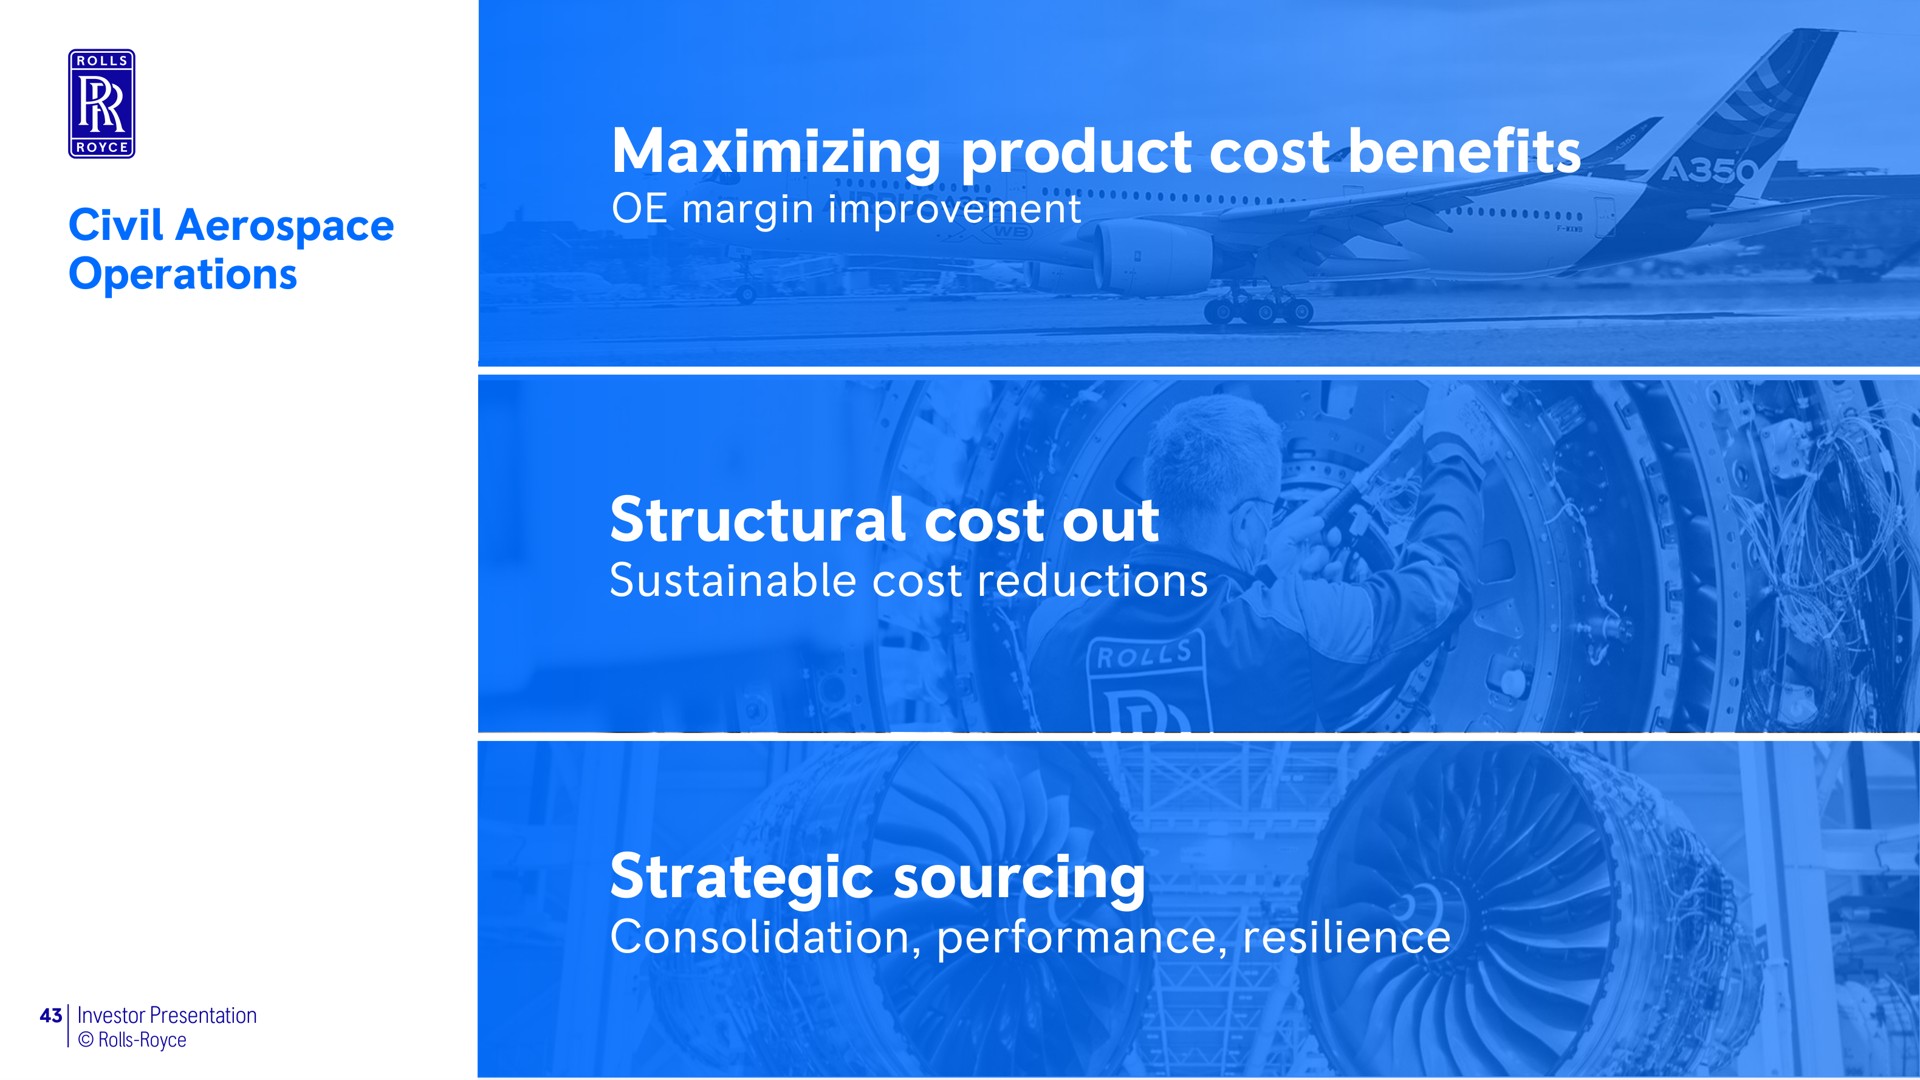 civil operations maximizing product cost benefits margin improvement structural cost out sustainable cost reductions strategic sourcing consolidation performance resilience | Rolls-Royce Holdings